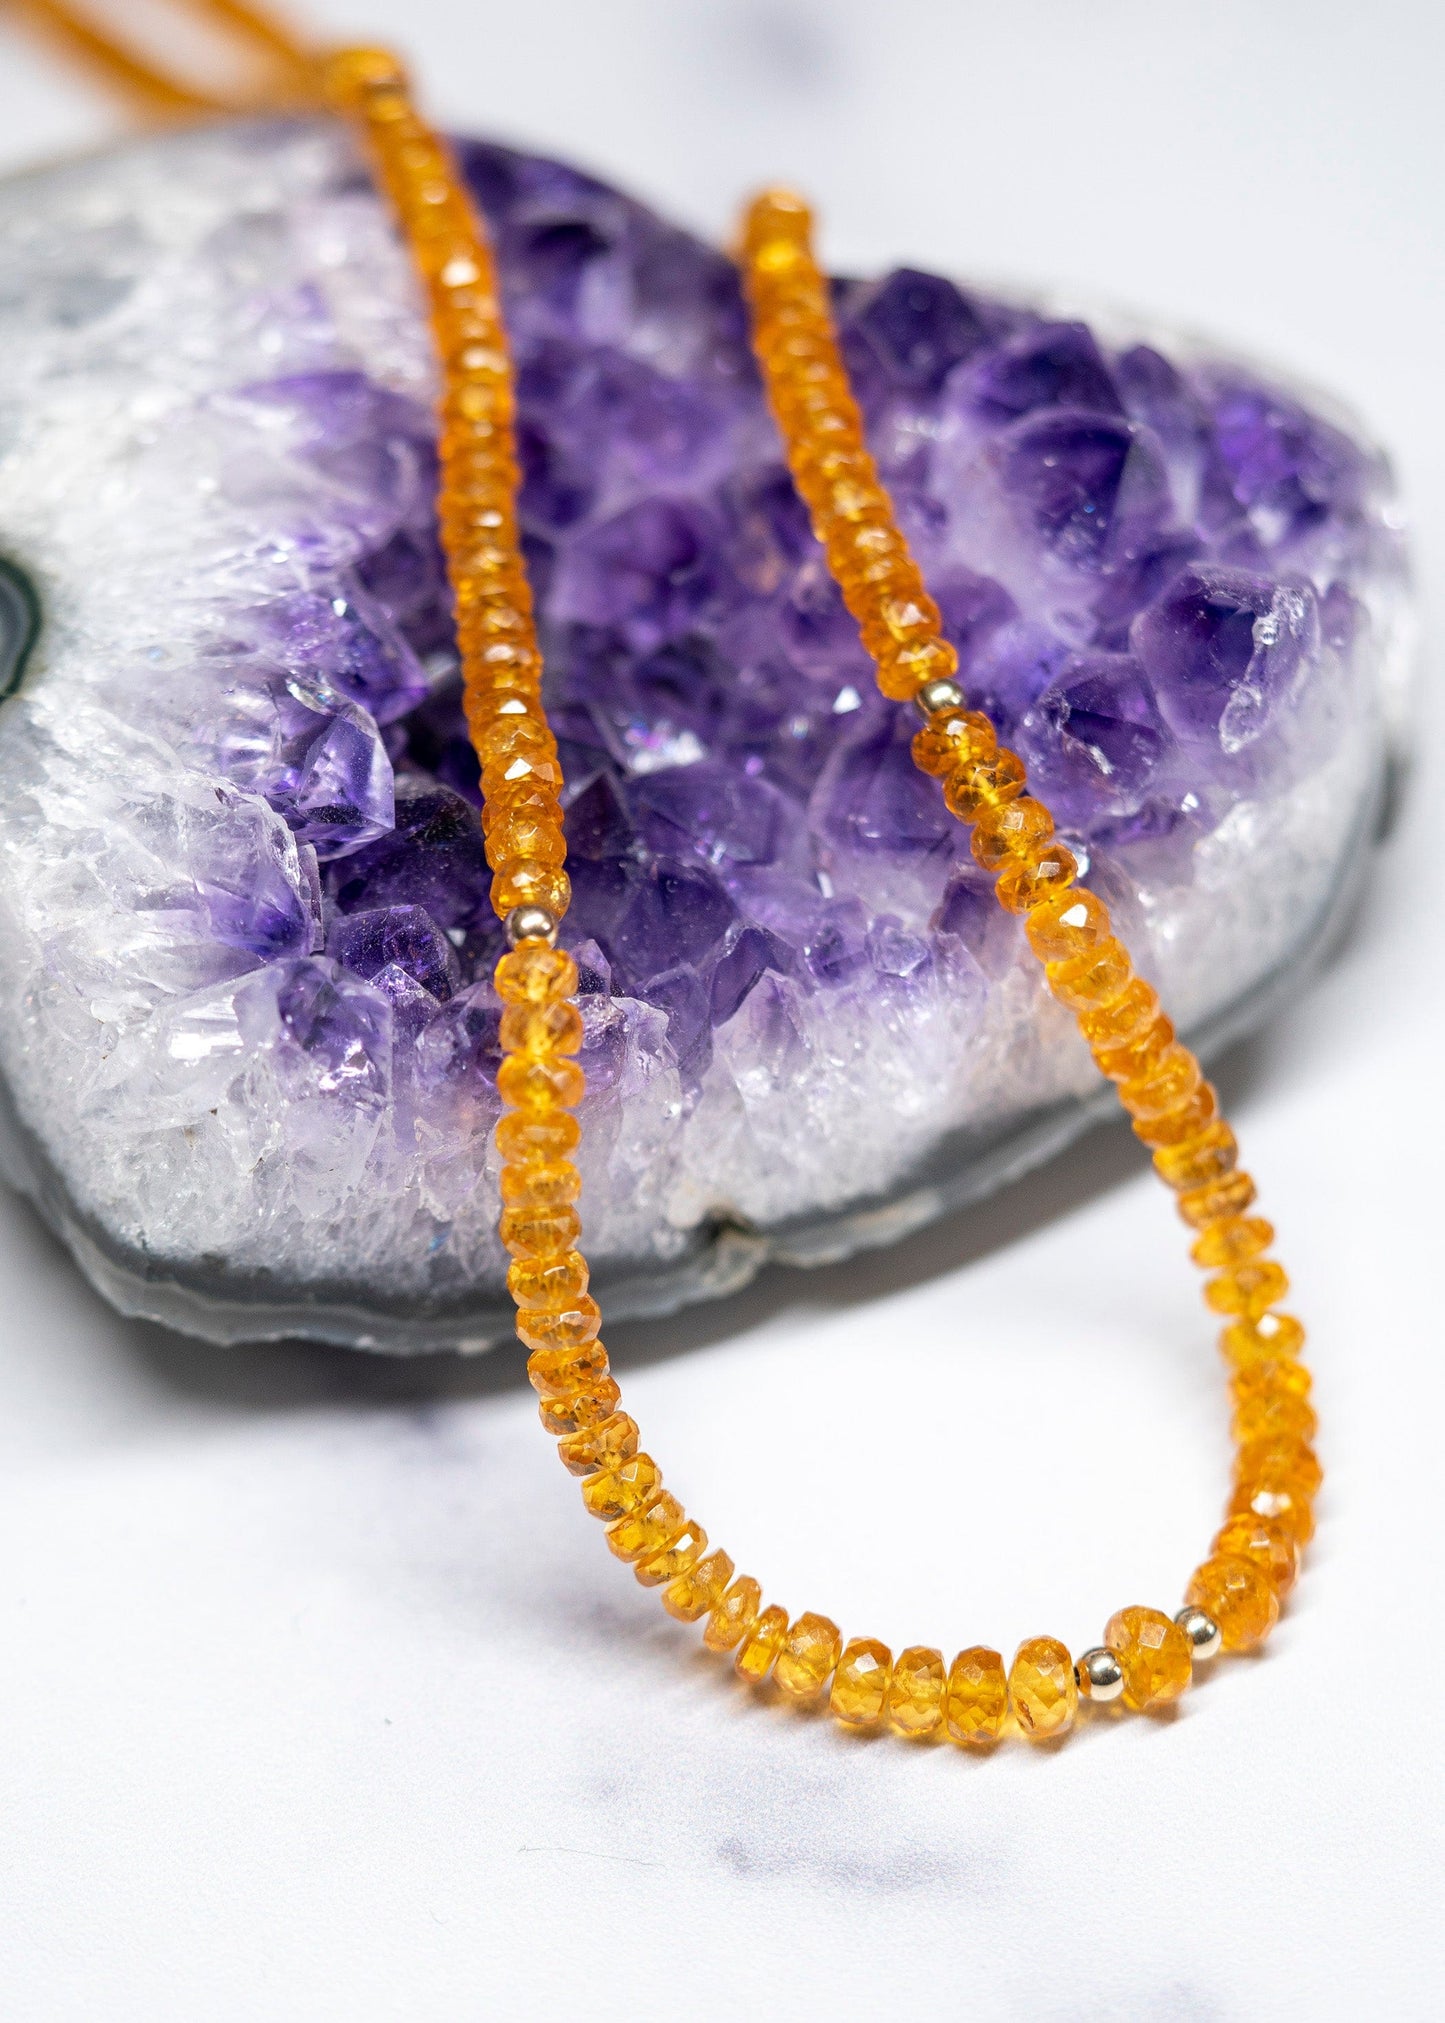 Orange Garnet Beaded Necklace with 14k gold Accents